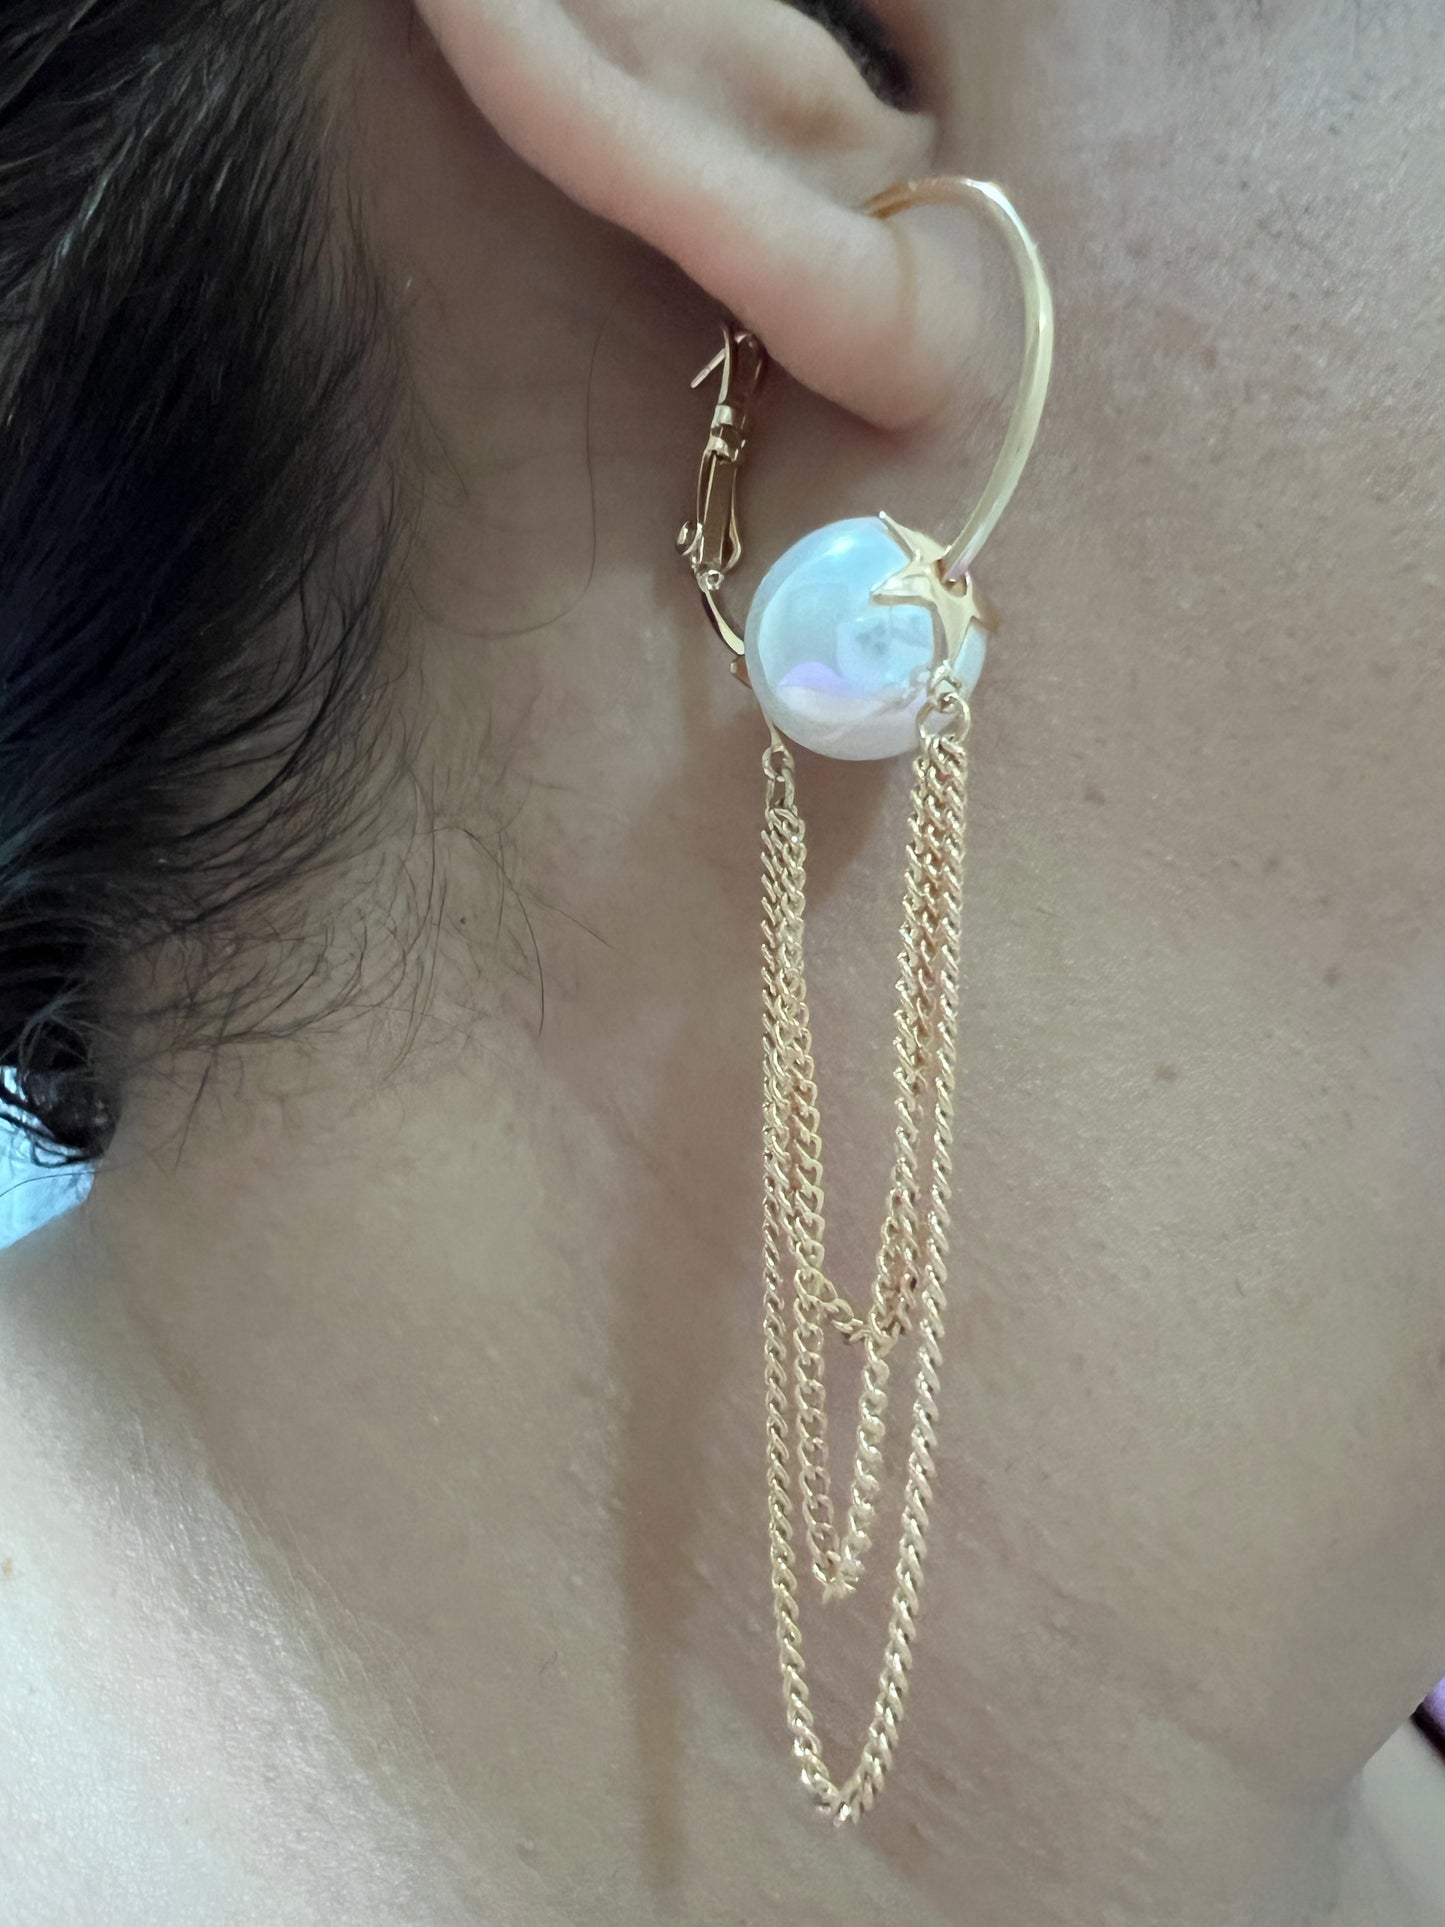 Gold Pearl Hoops With Dangling chains Earrings